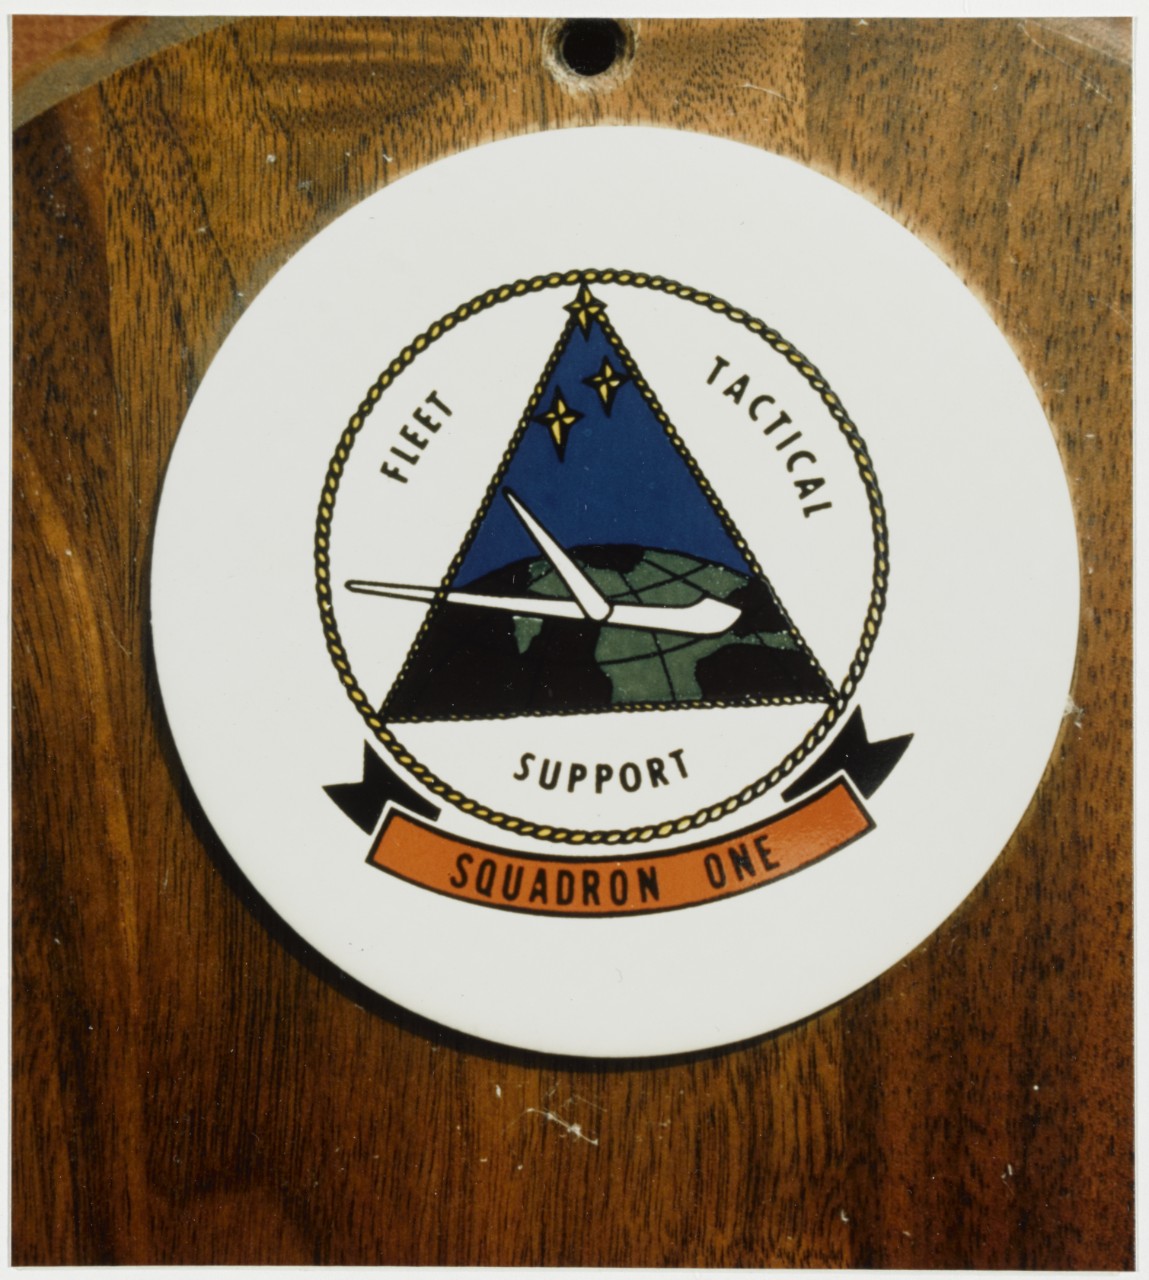 Insignia: Fleet Tactical Support Squadron One.